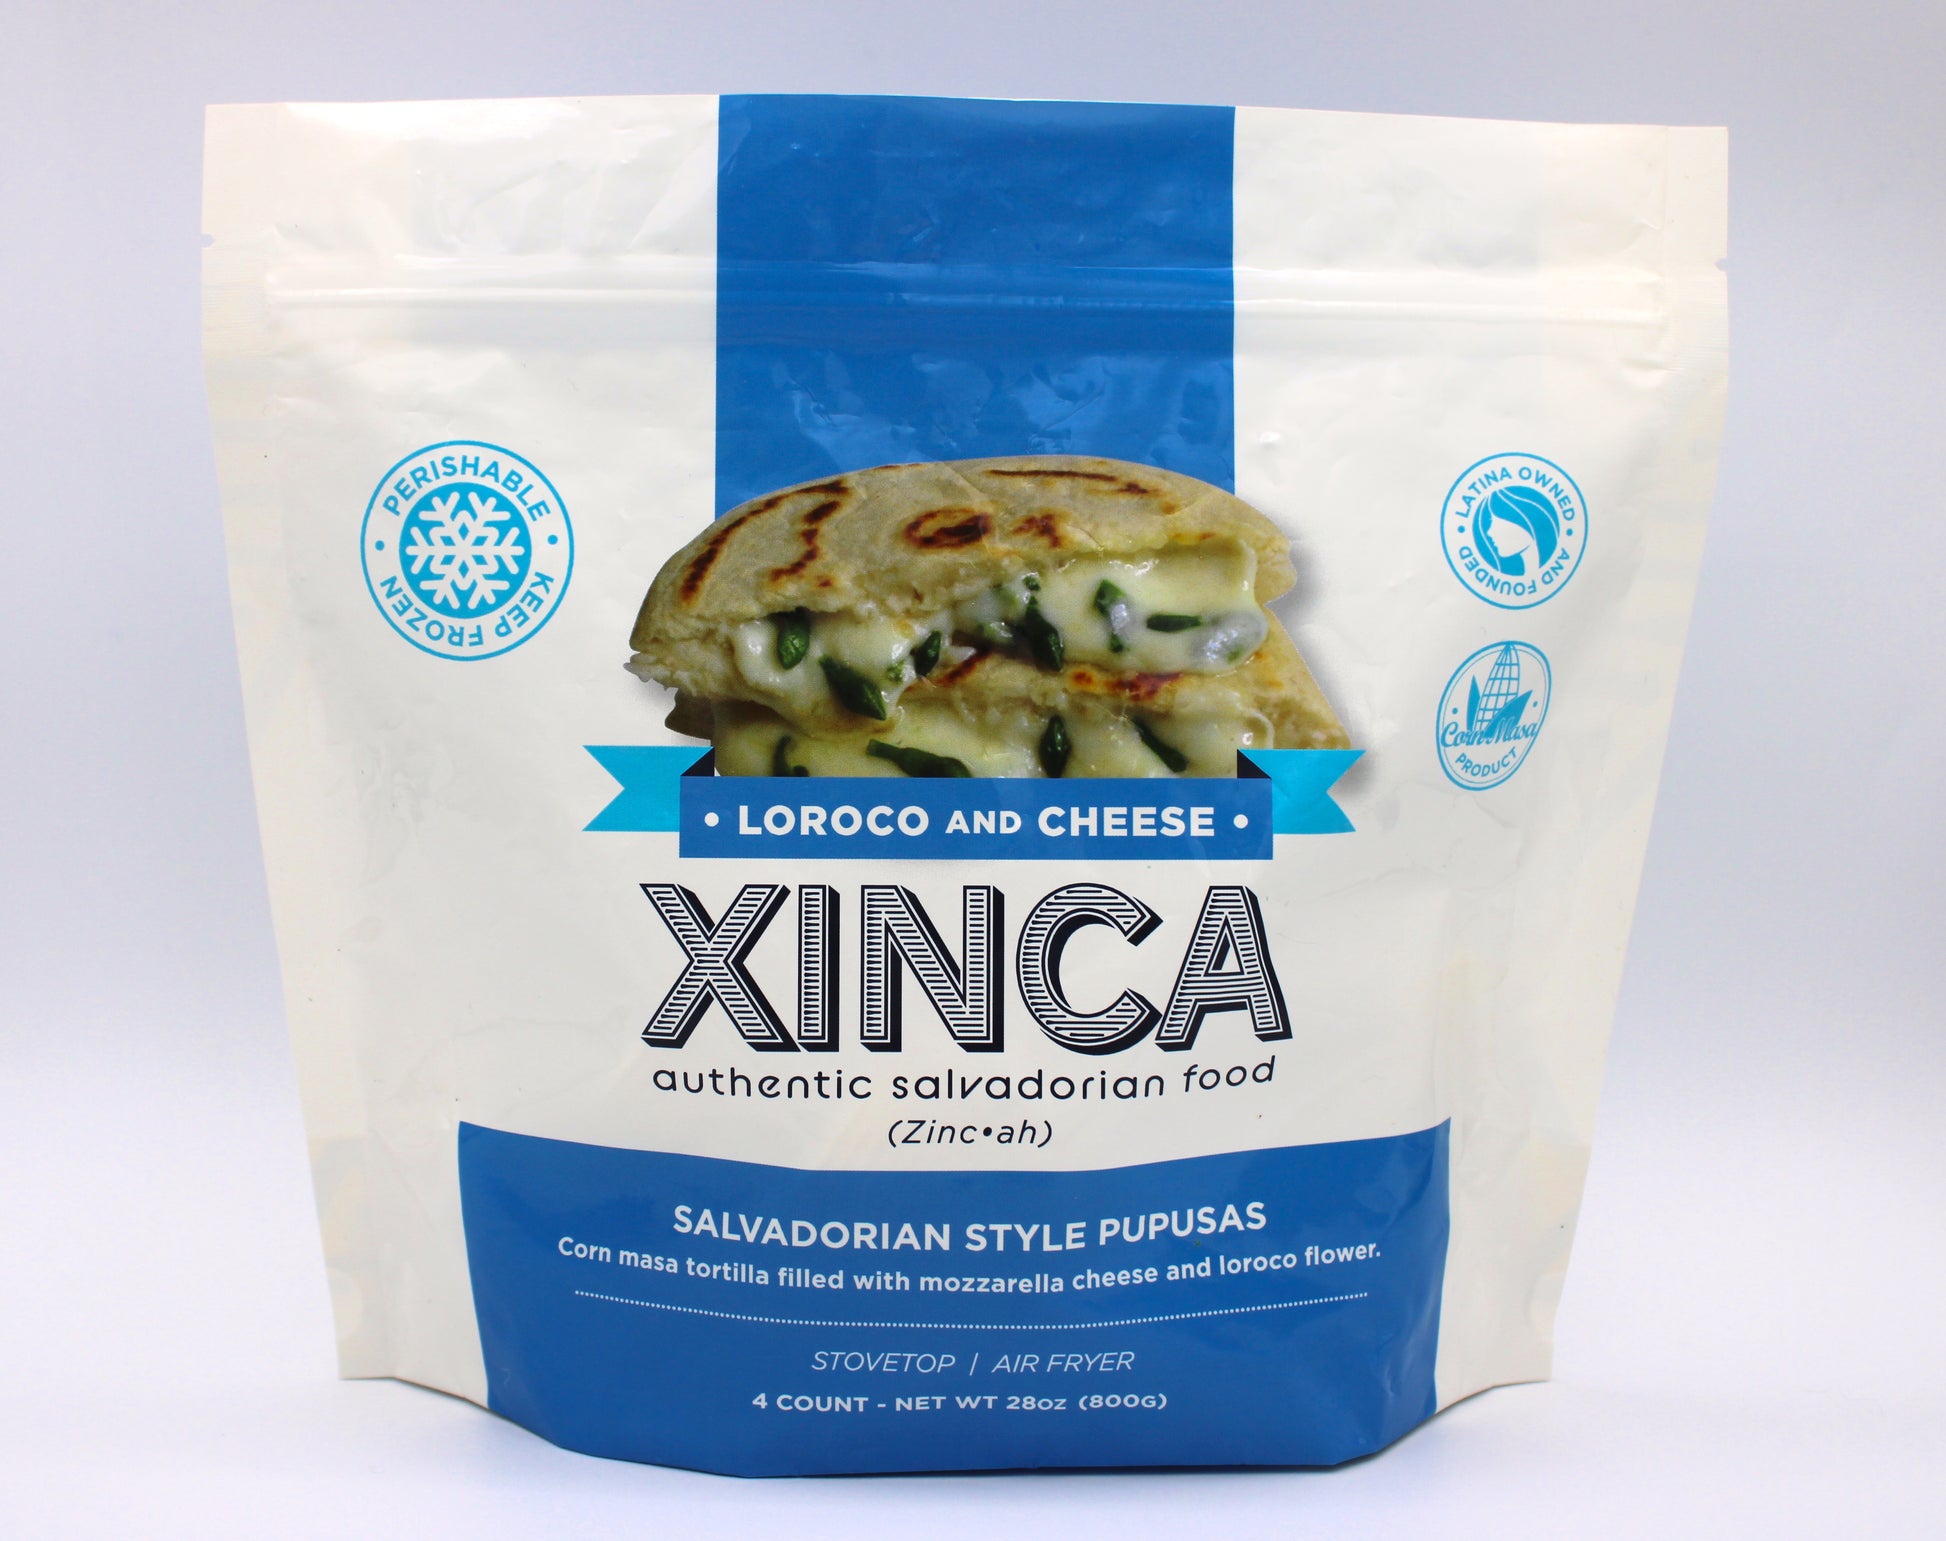 Retail Packaging of Loroco & Cheese Pupusa in a light blue and white color. With Perishable Keep Frozen widget and Corn Masa Product